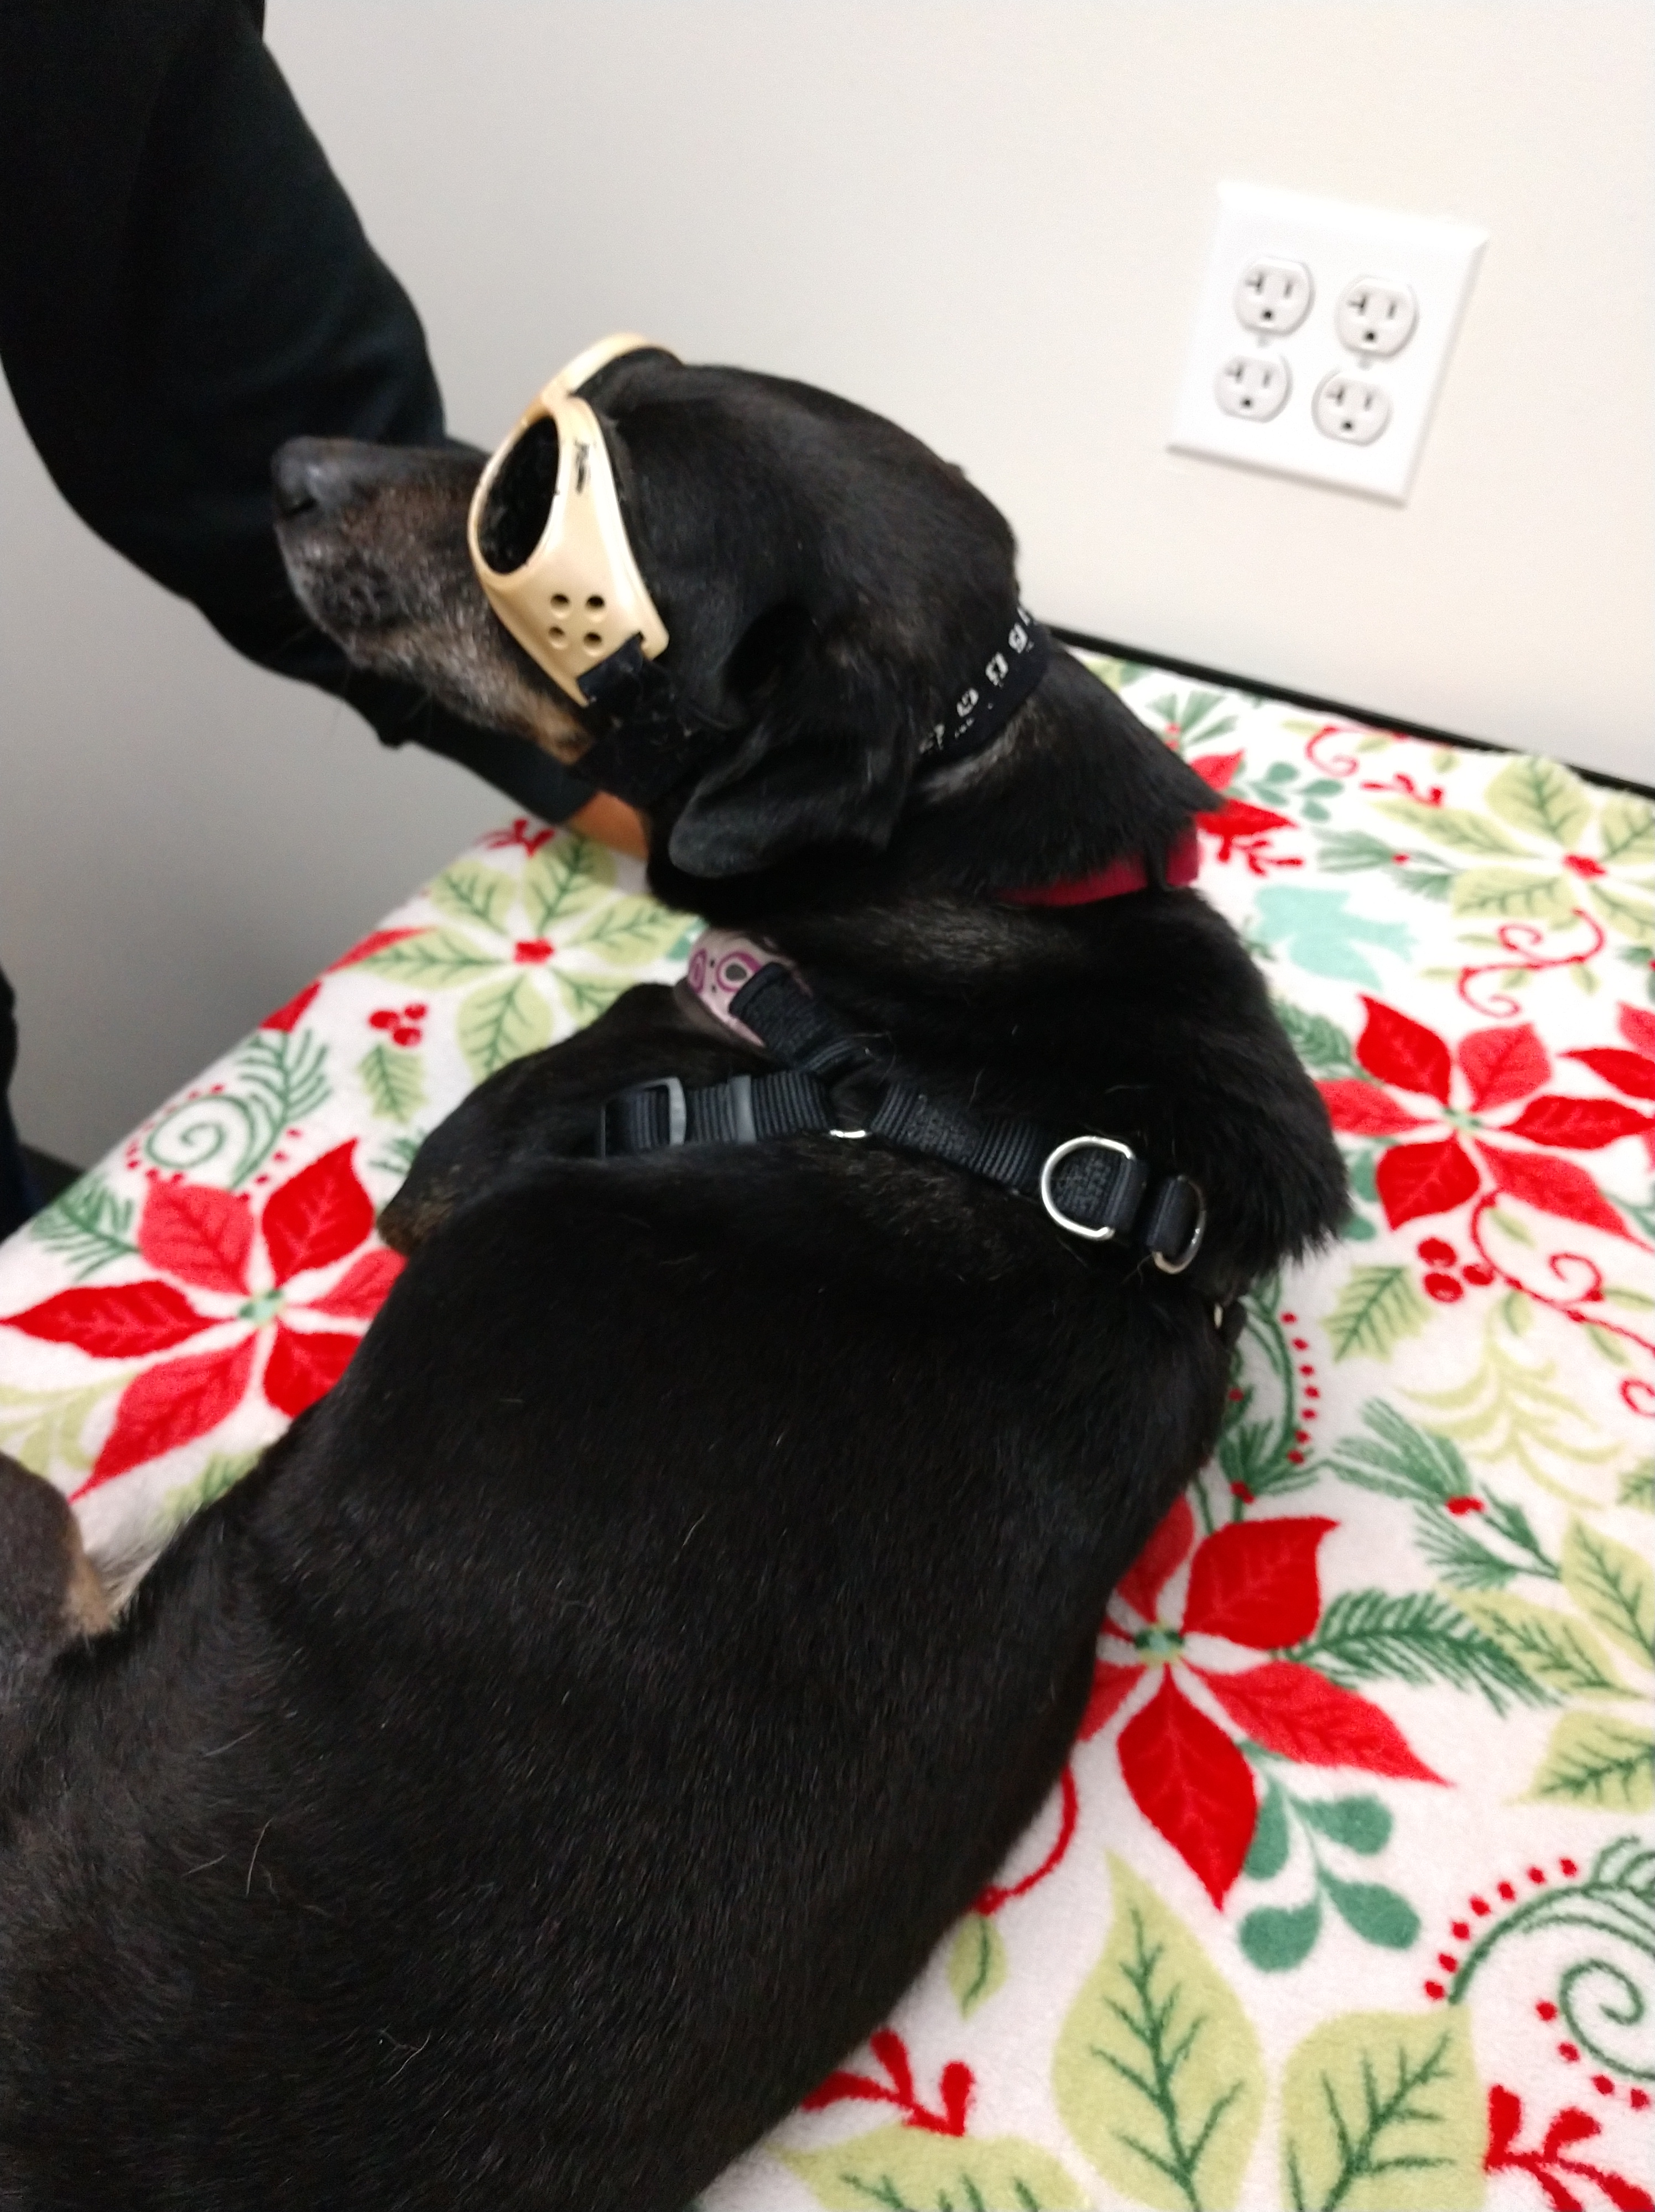 Angie in Doggles